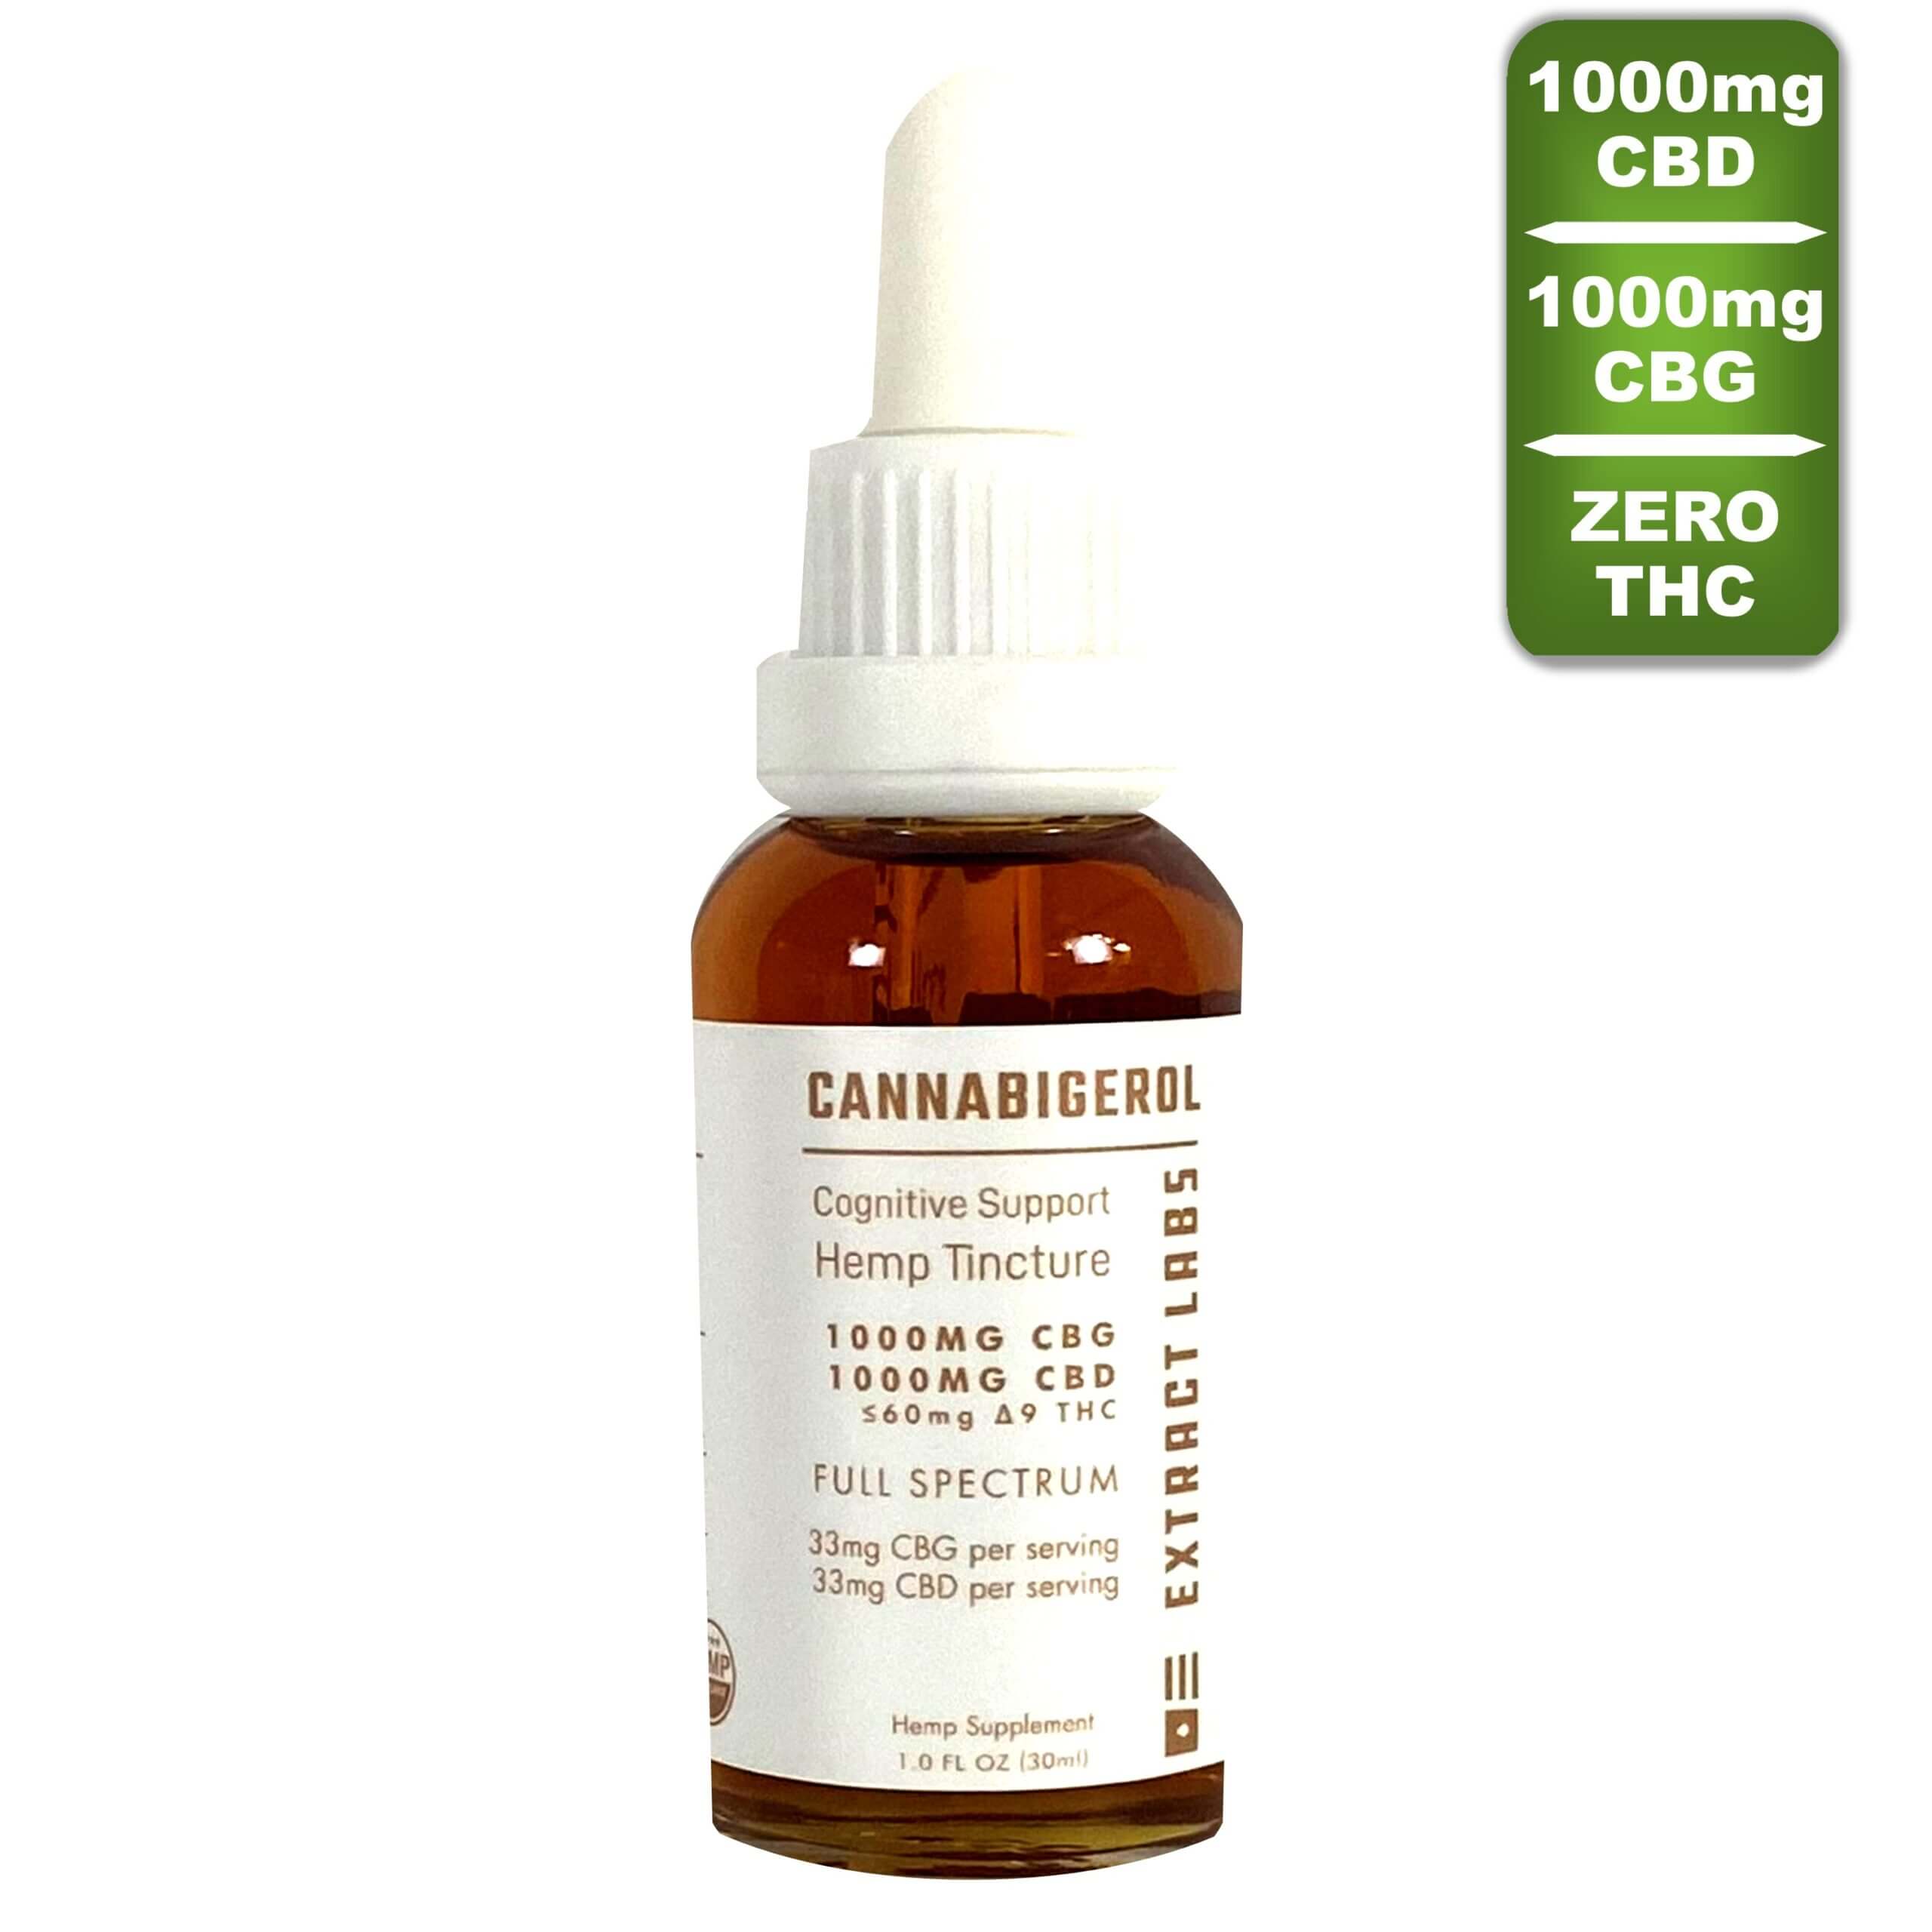 Extract labs - Cognitive Support tincture 2000mg CBD + THc